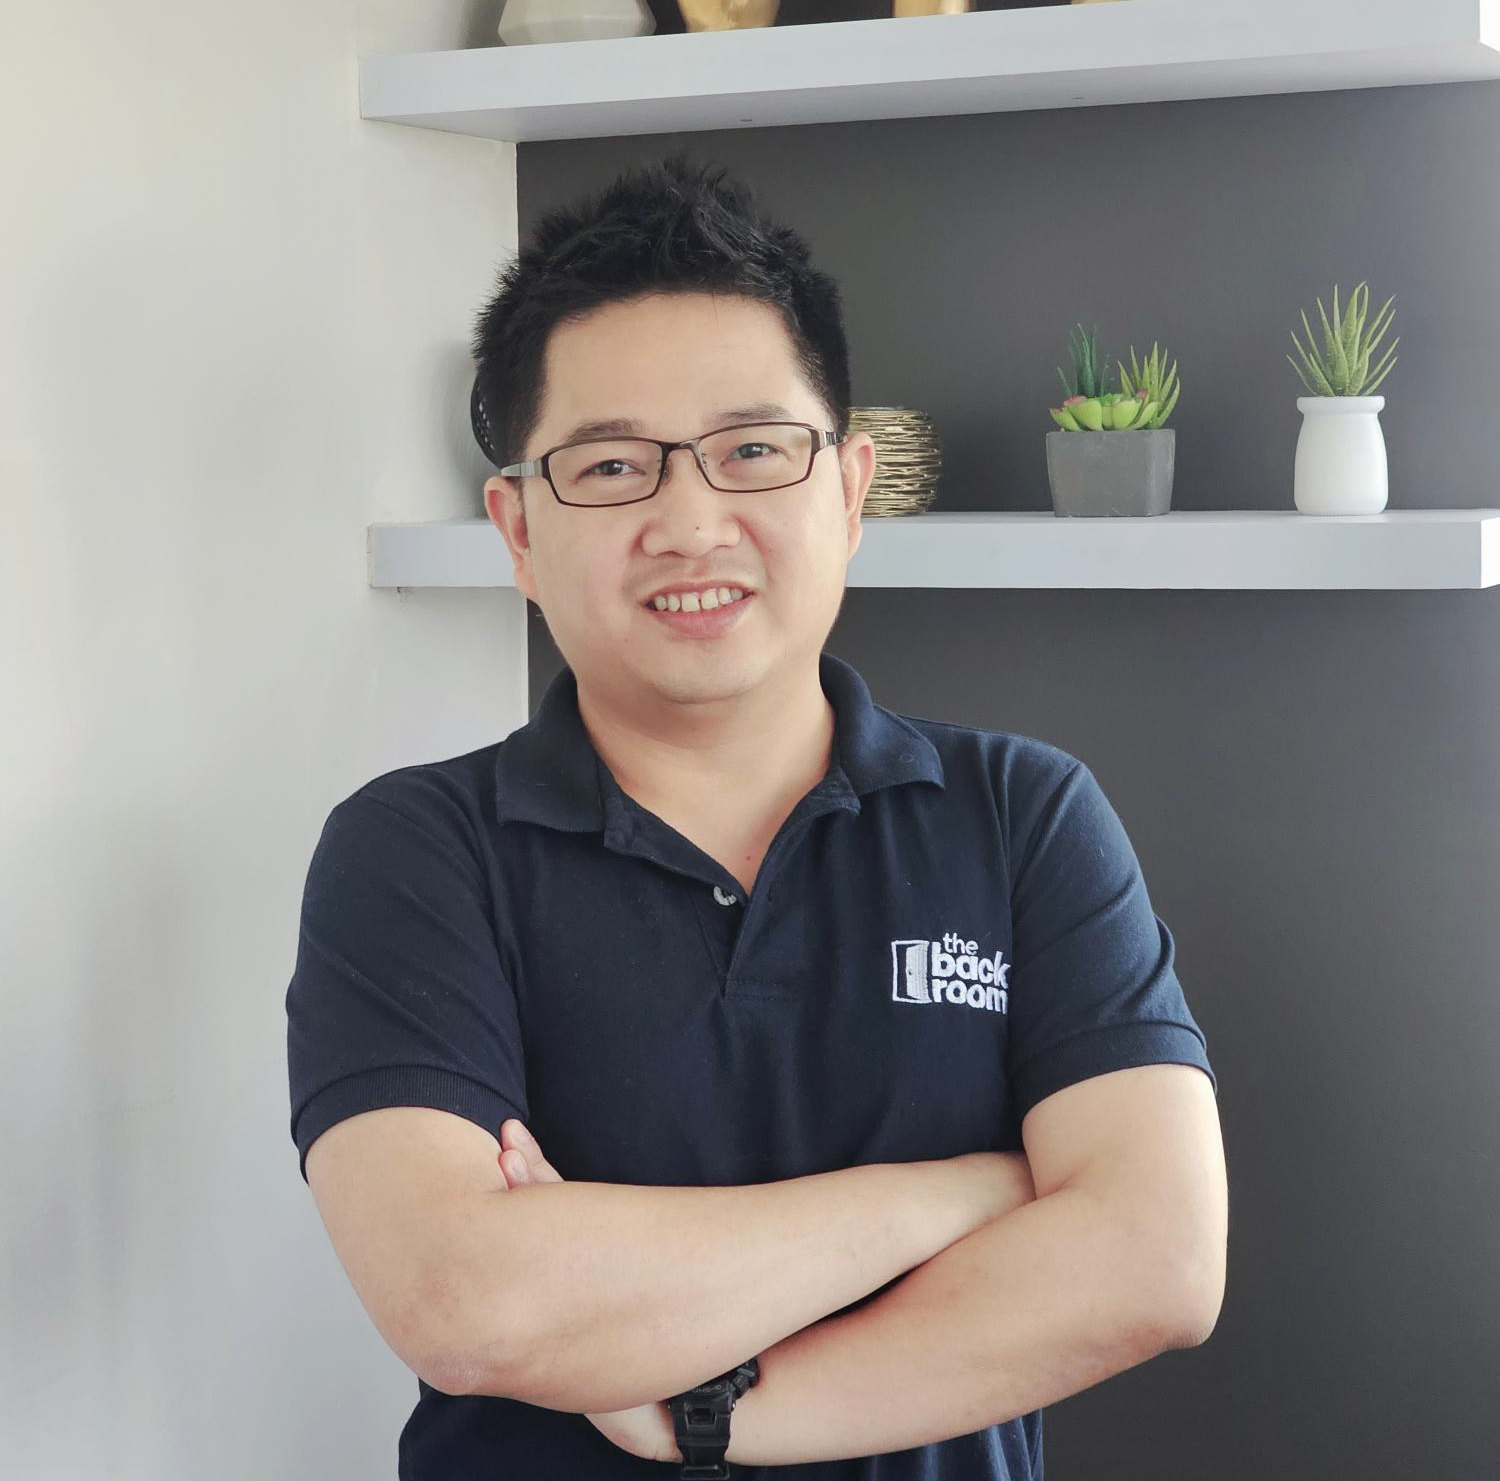 Maynard Pineda, IT & Cybersecurity Manager at The Back Room